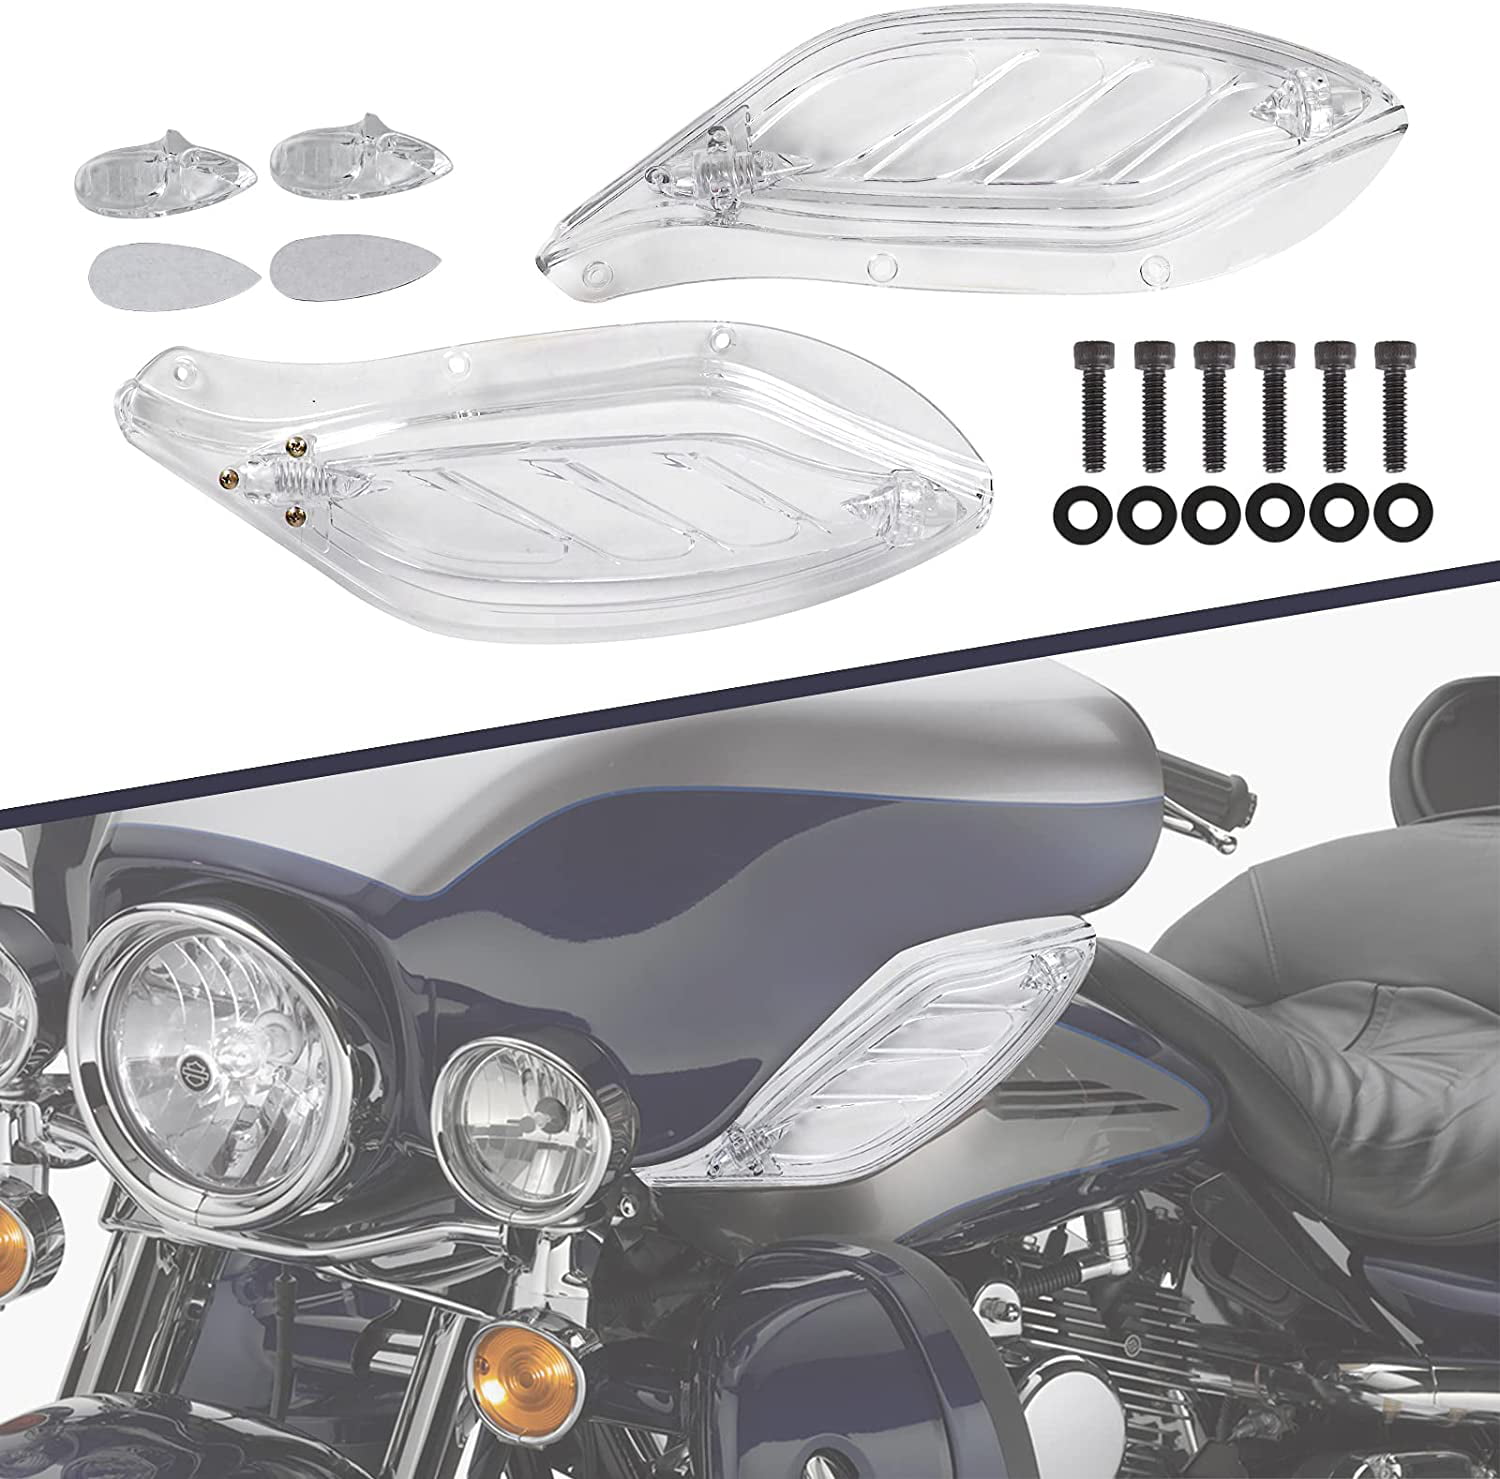 Clear AUFER Fairing Air Deflectors Side Wings Windshield Compatible with for Touring Electra Glide Street Glide Tri Glide Ultra Classic CVO 1996-2013 